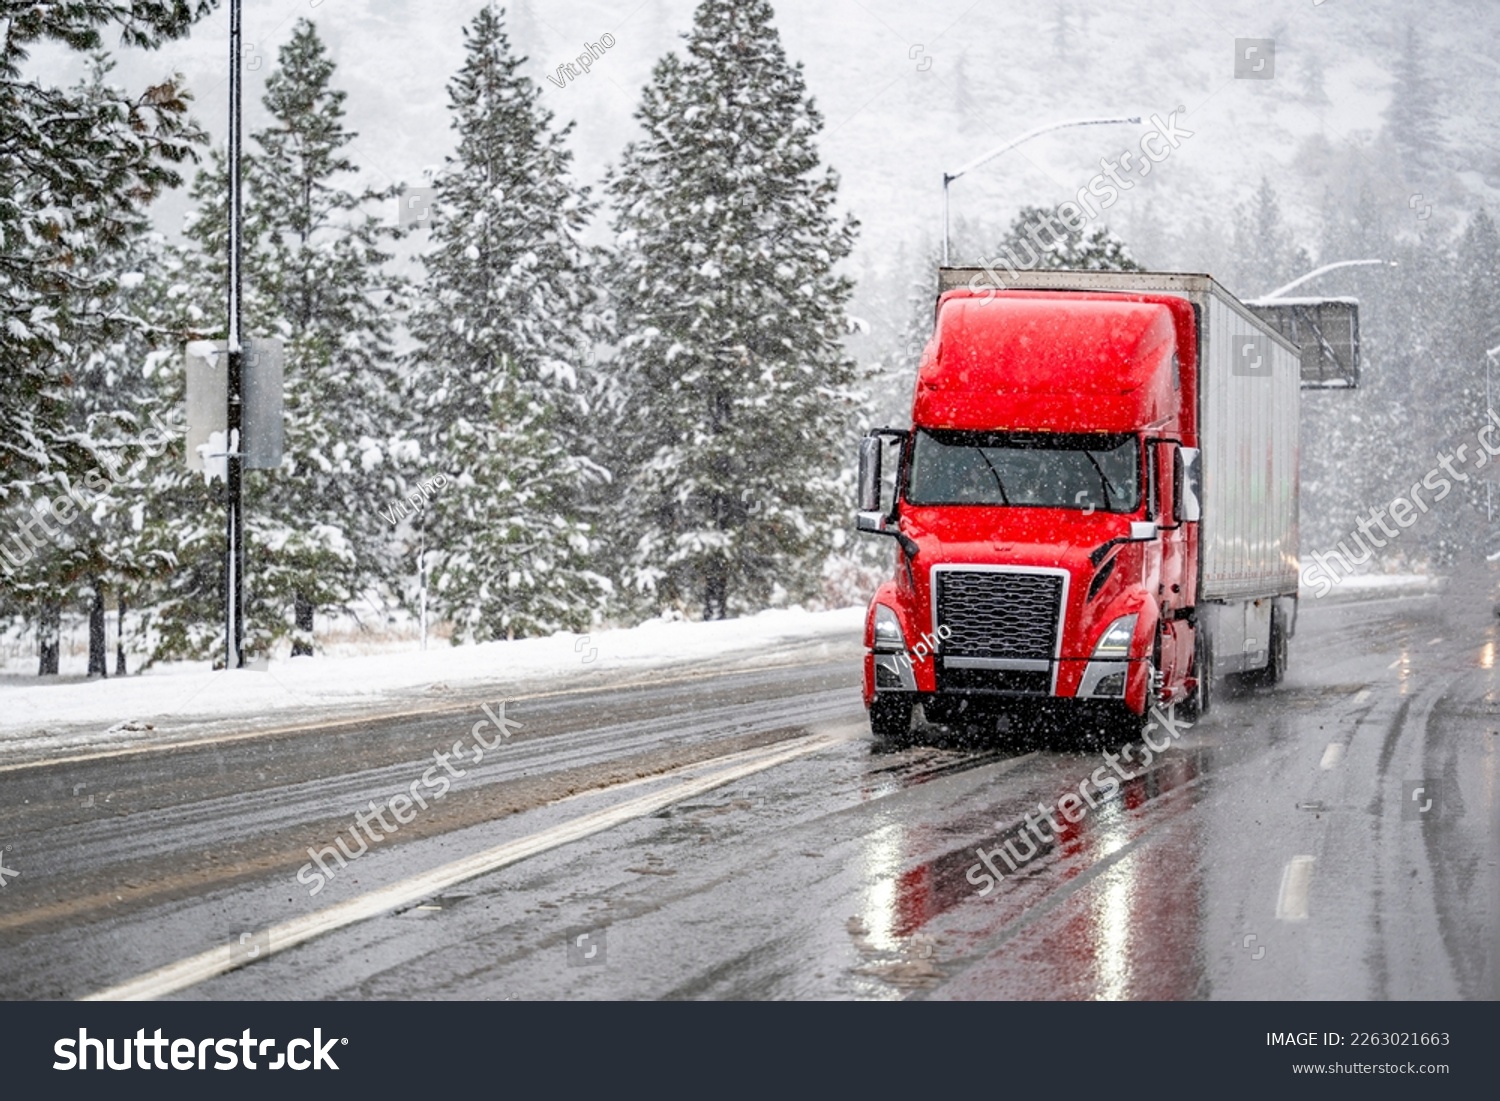 Red big rig commercial semi truck transporting cargo in dry van semi trailer running on the wet turning road with winter forest at snowing weather during a snow storm near Shasta Lake in California #2263021663